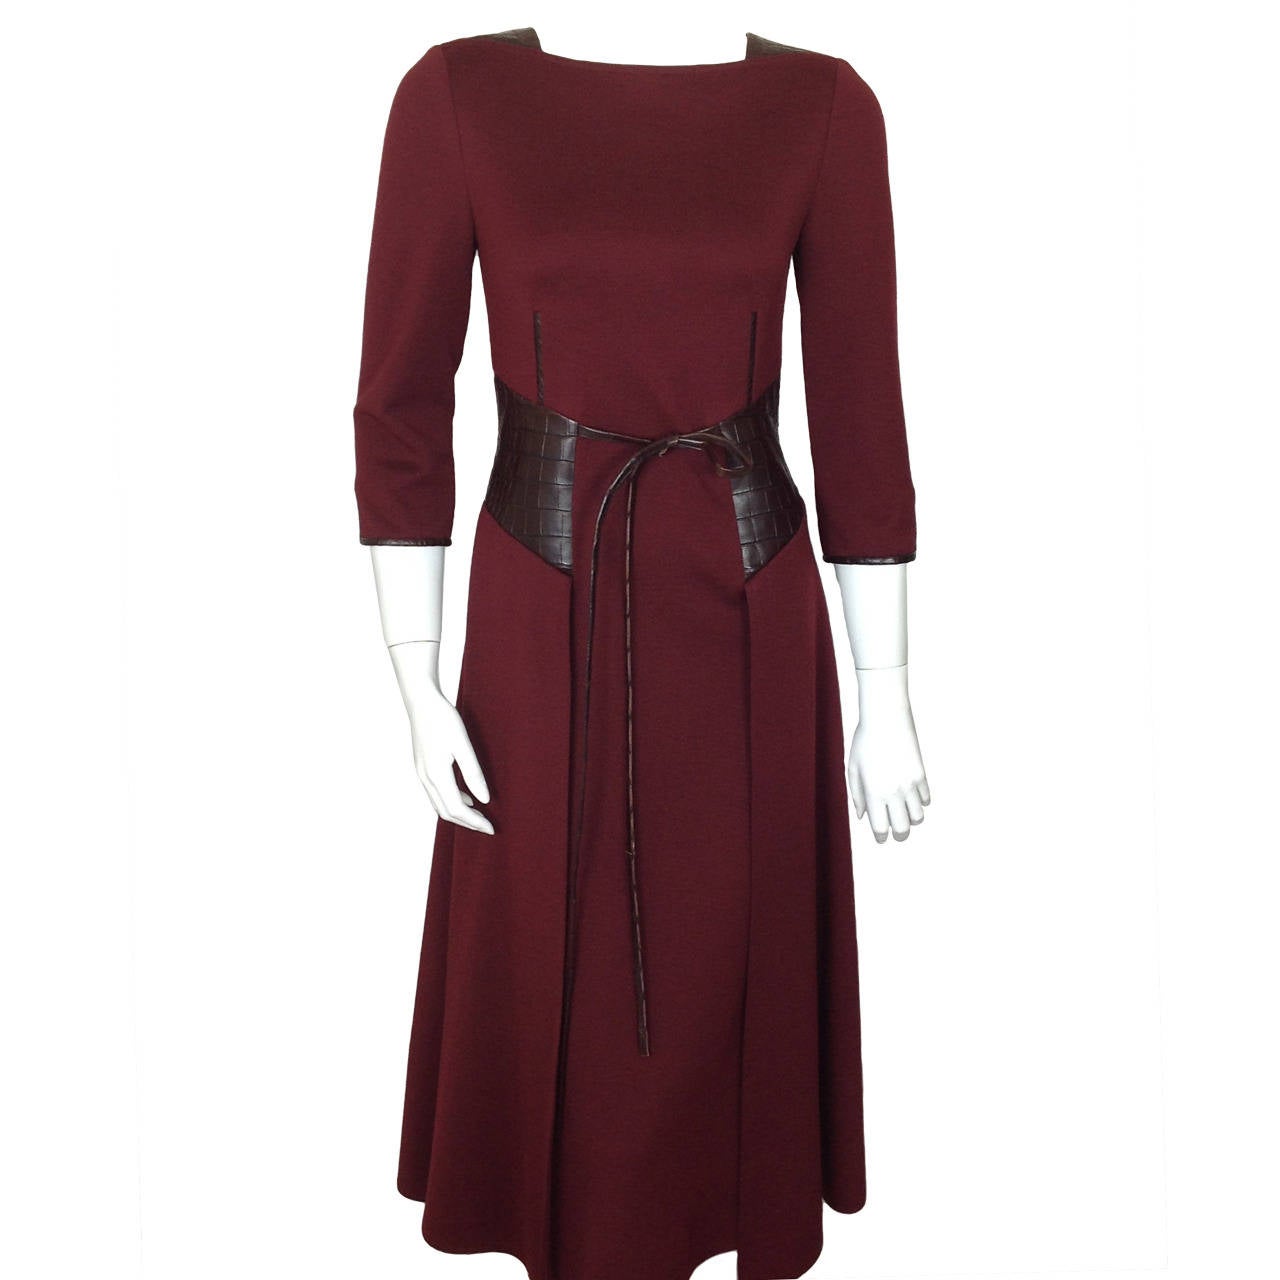 Ralph Rucci dress trimmed in leather